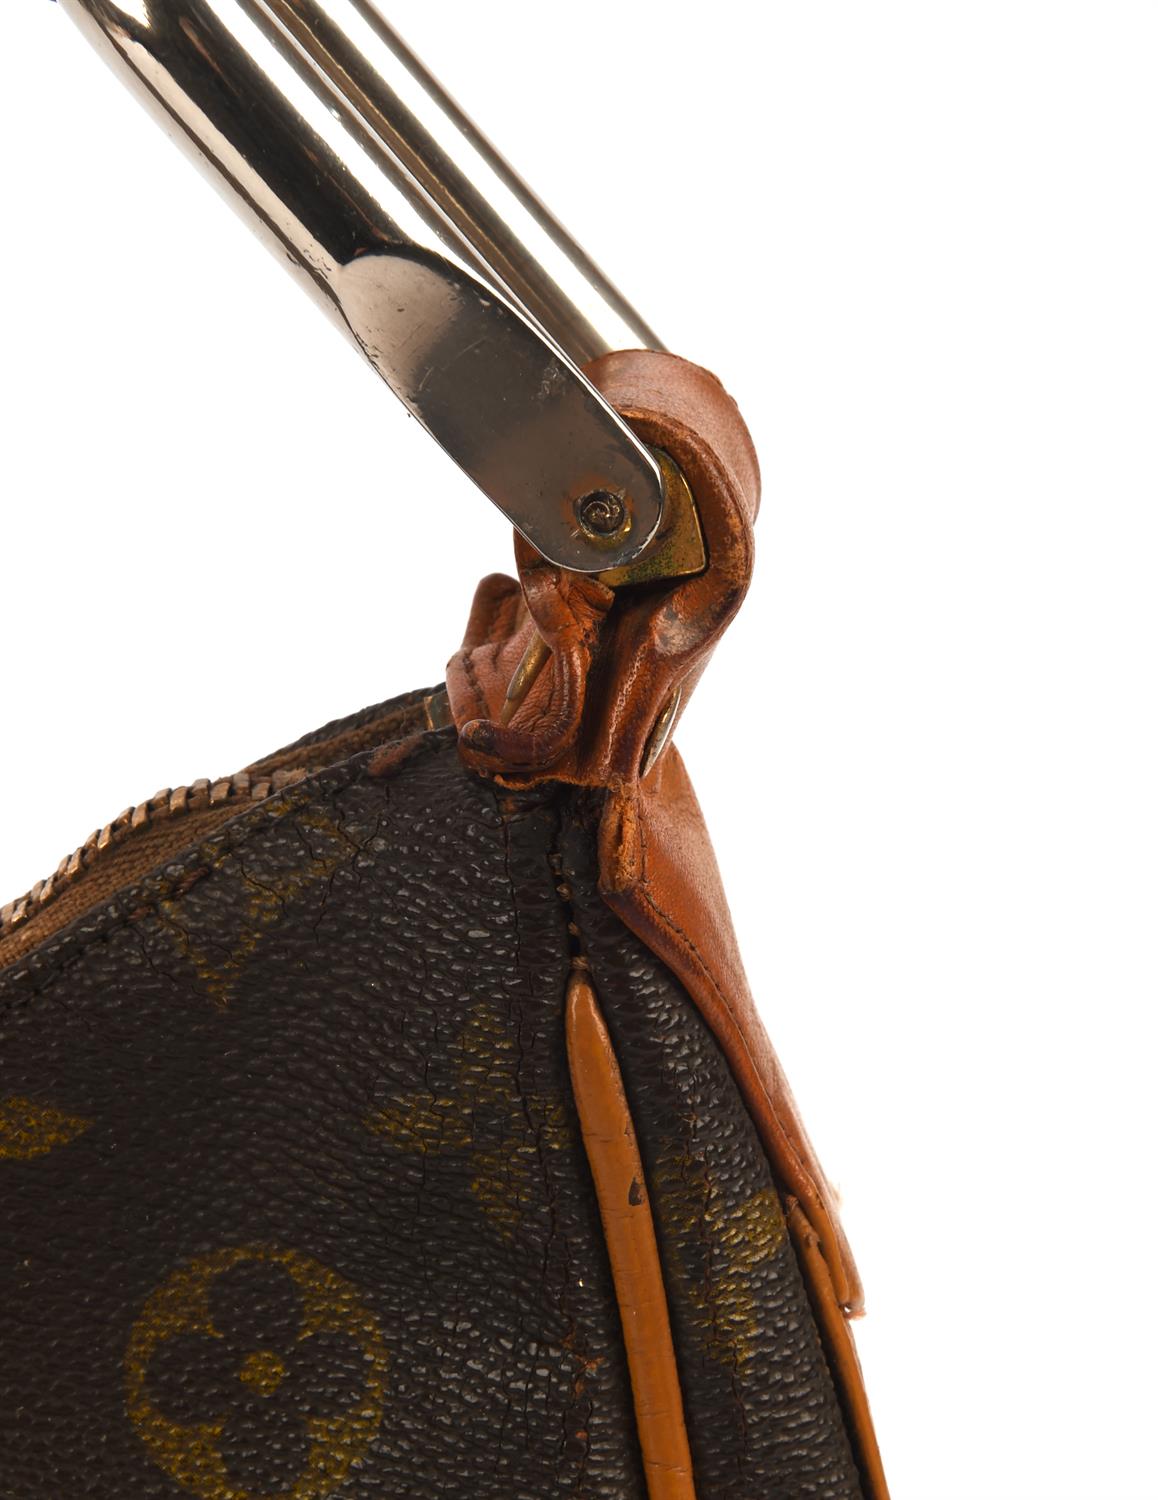 LOUIS VUITTON vintage monogrammed TIKAL style small handbag/ shoulder bag with faded initials AG on - Image 9 of 10